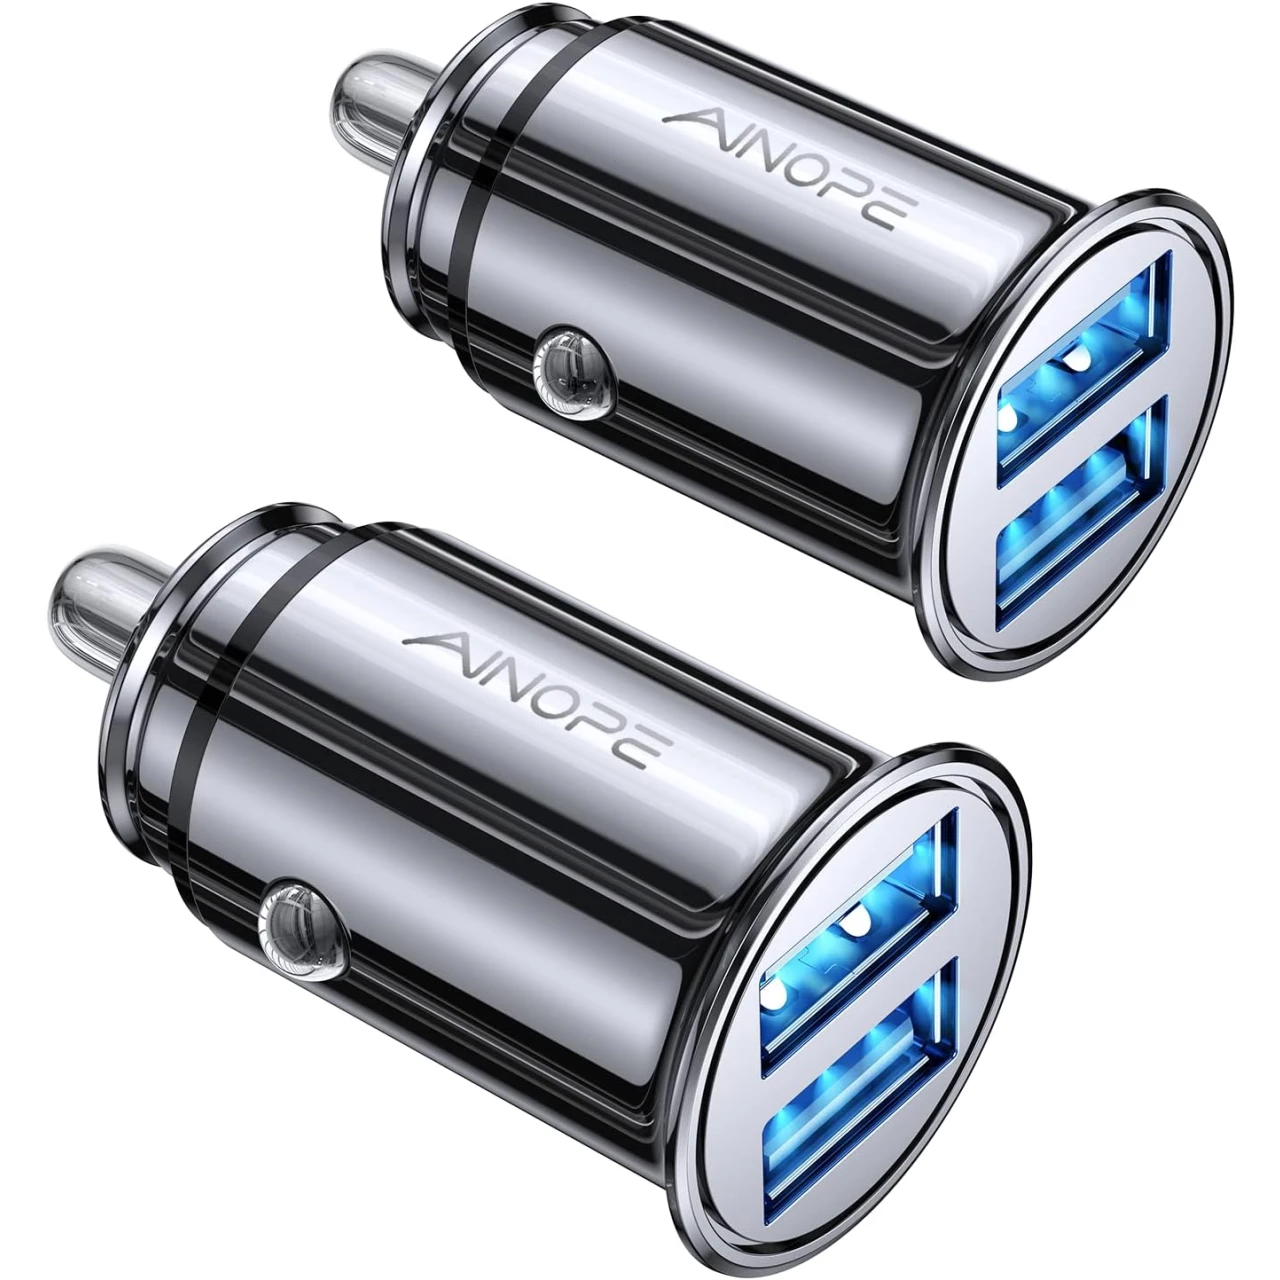 AINOPE 2 Pack Fast Mini Car Charger, 4.8A Metal Car Charger Adapter Flush Fit